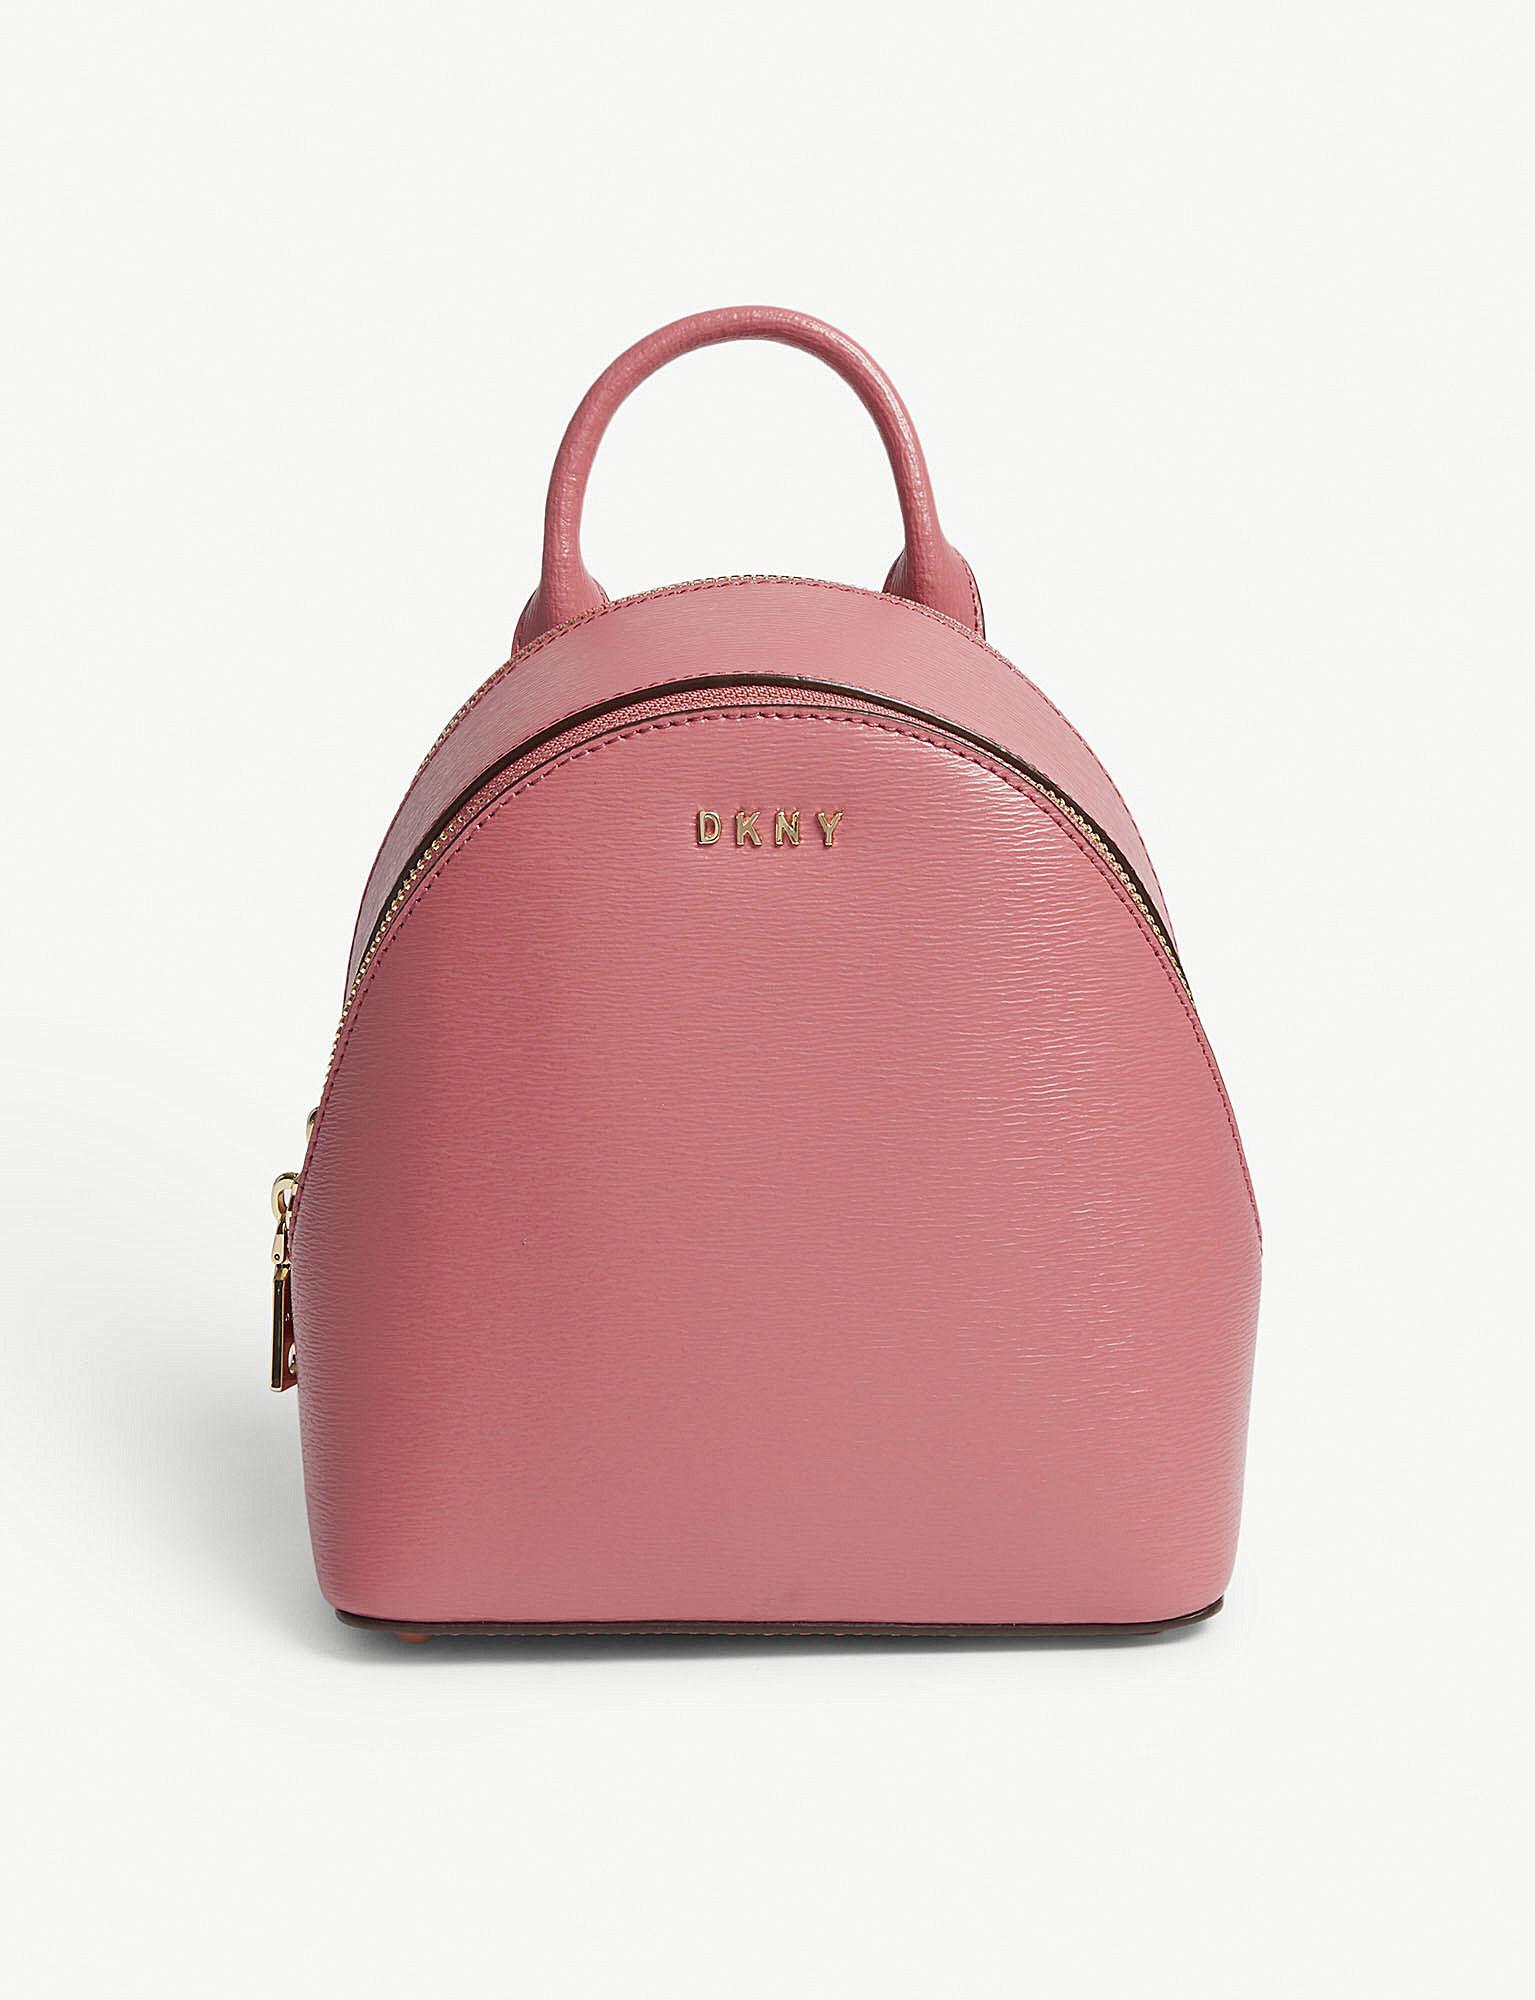 DKNY Bryant Park Mini Leather Backpack in Pink | Lyst